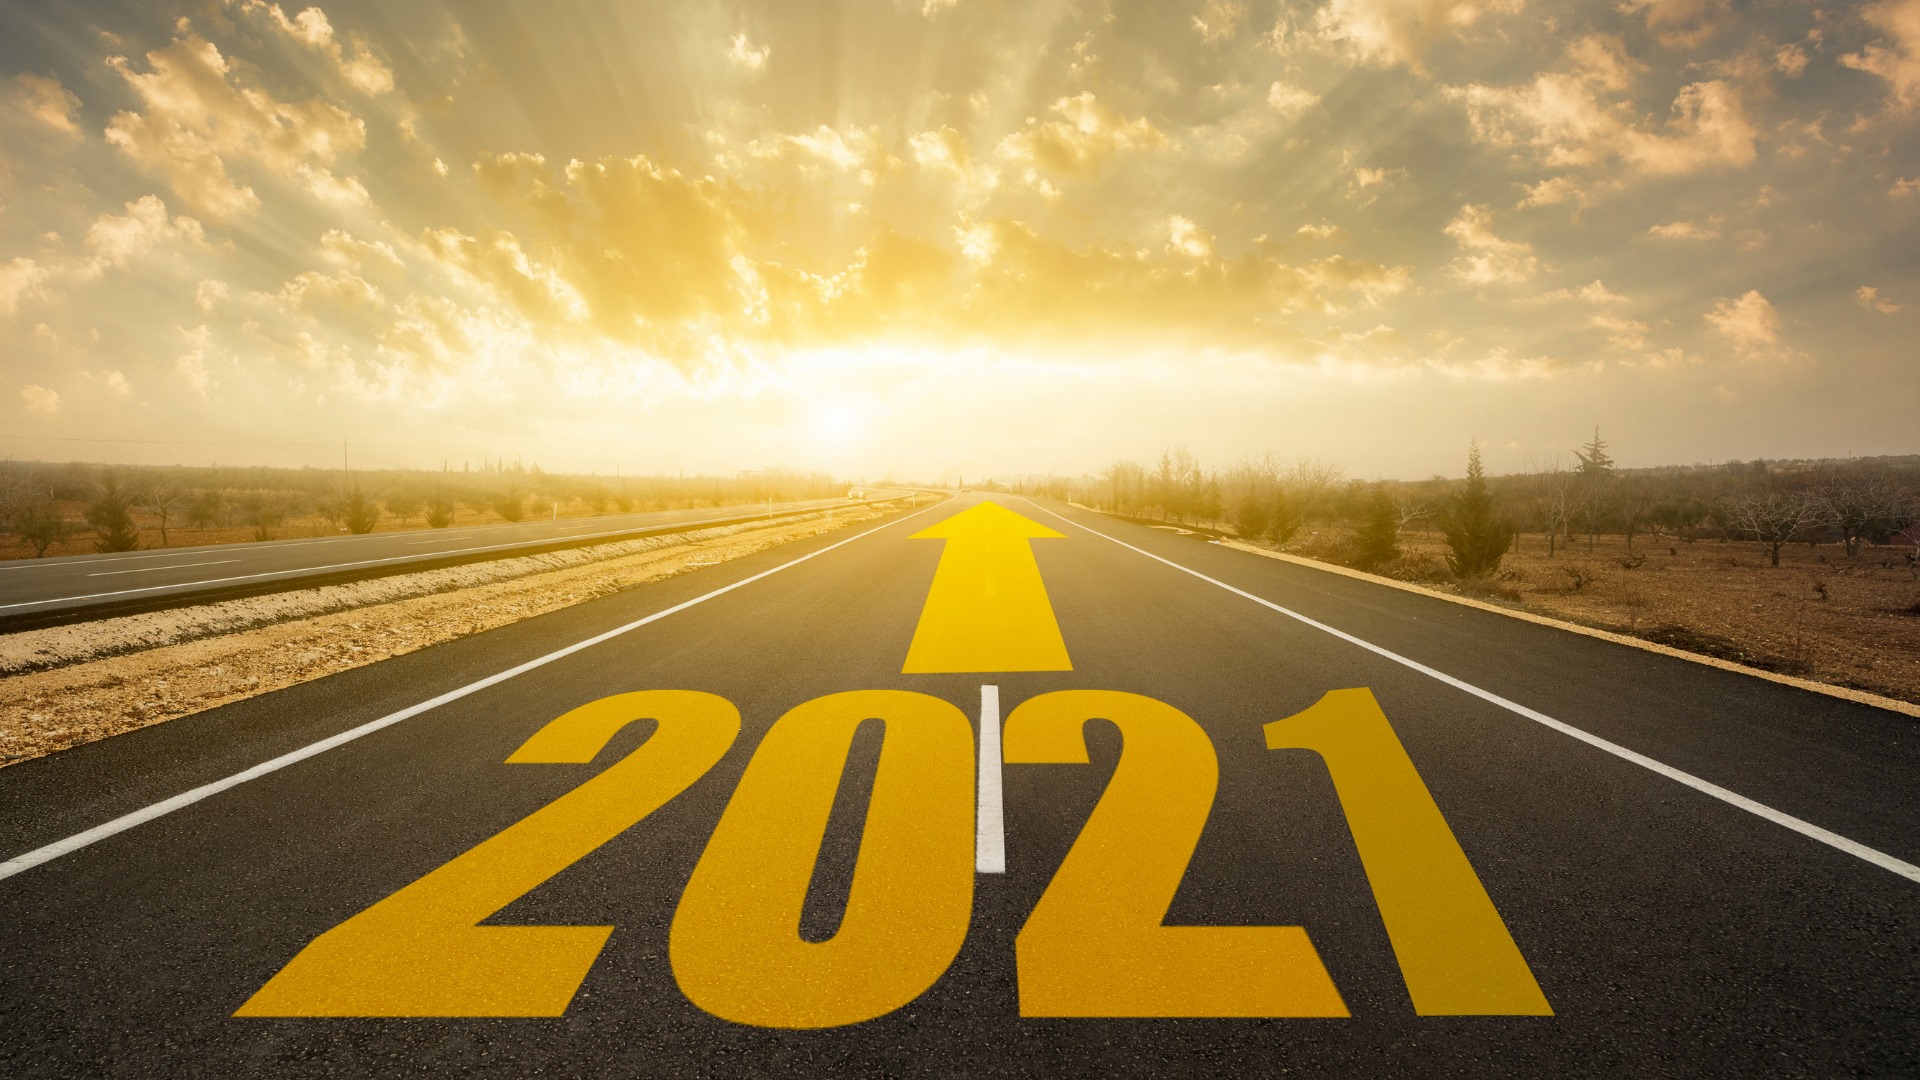 Start 2021 Strong by Planning the Year Ahead!